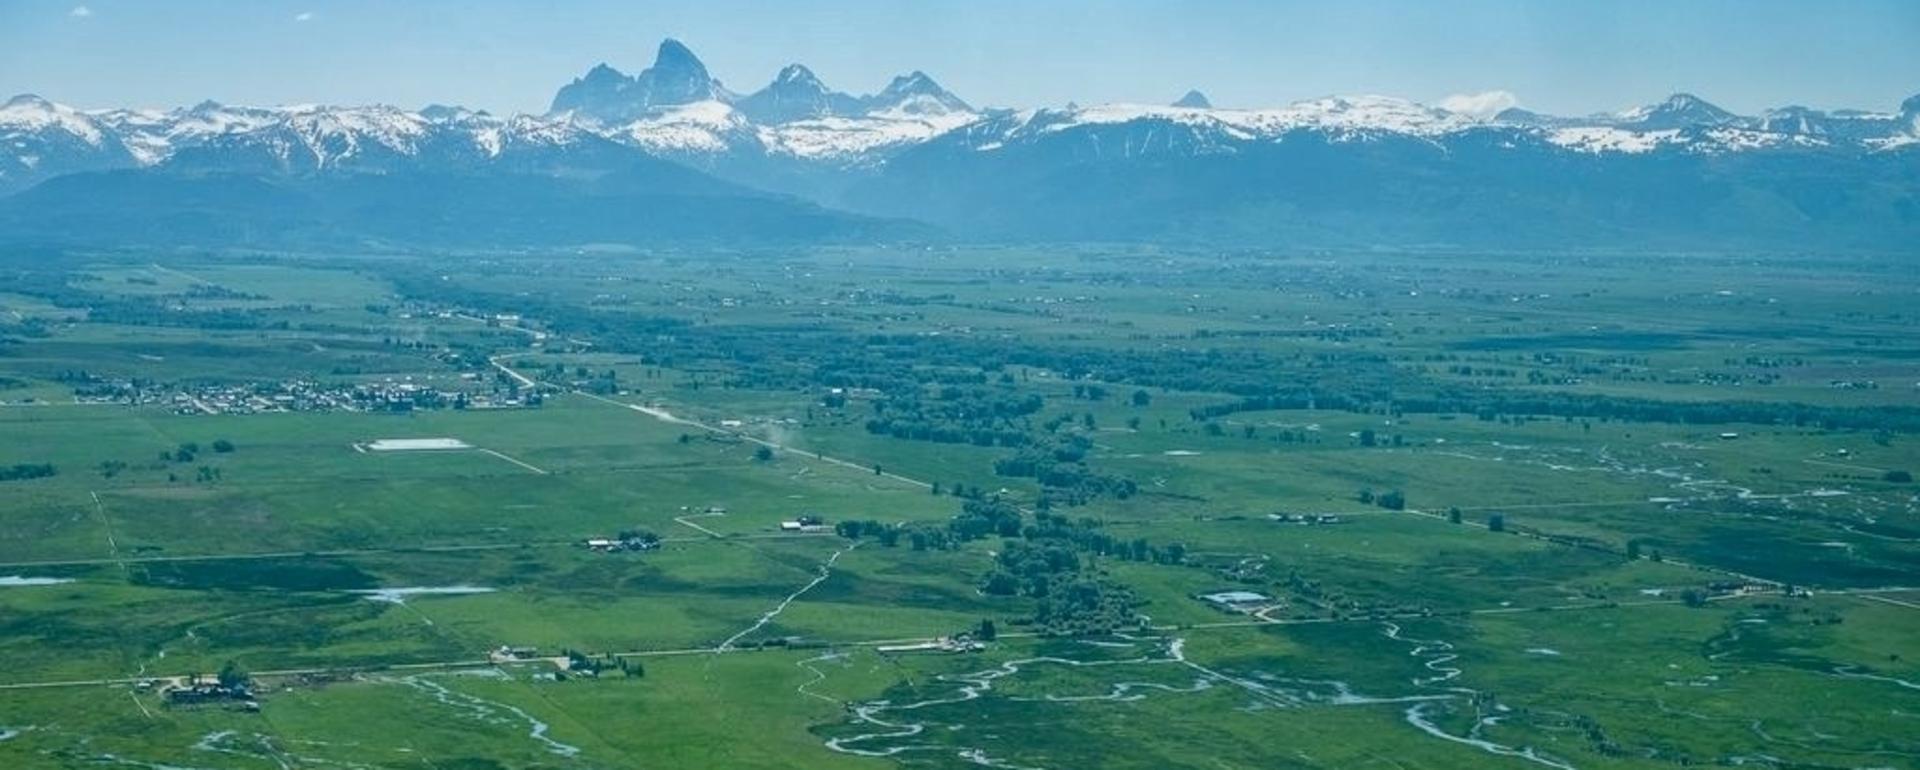 The aquifer in Idaho's Teton Valley has been diminishing for years. One local group is hoping to change its trajectory.